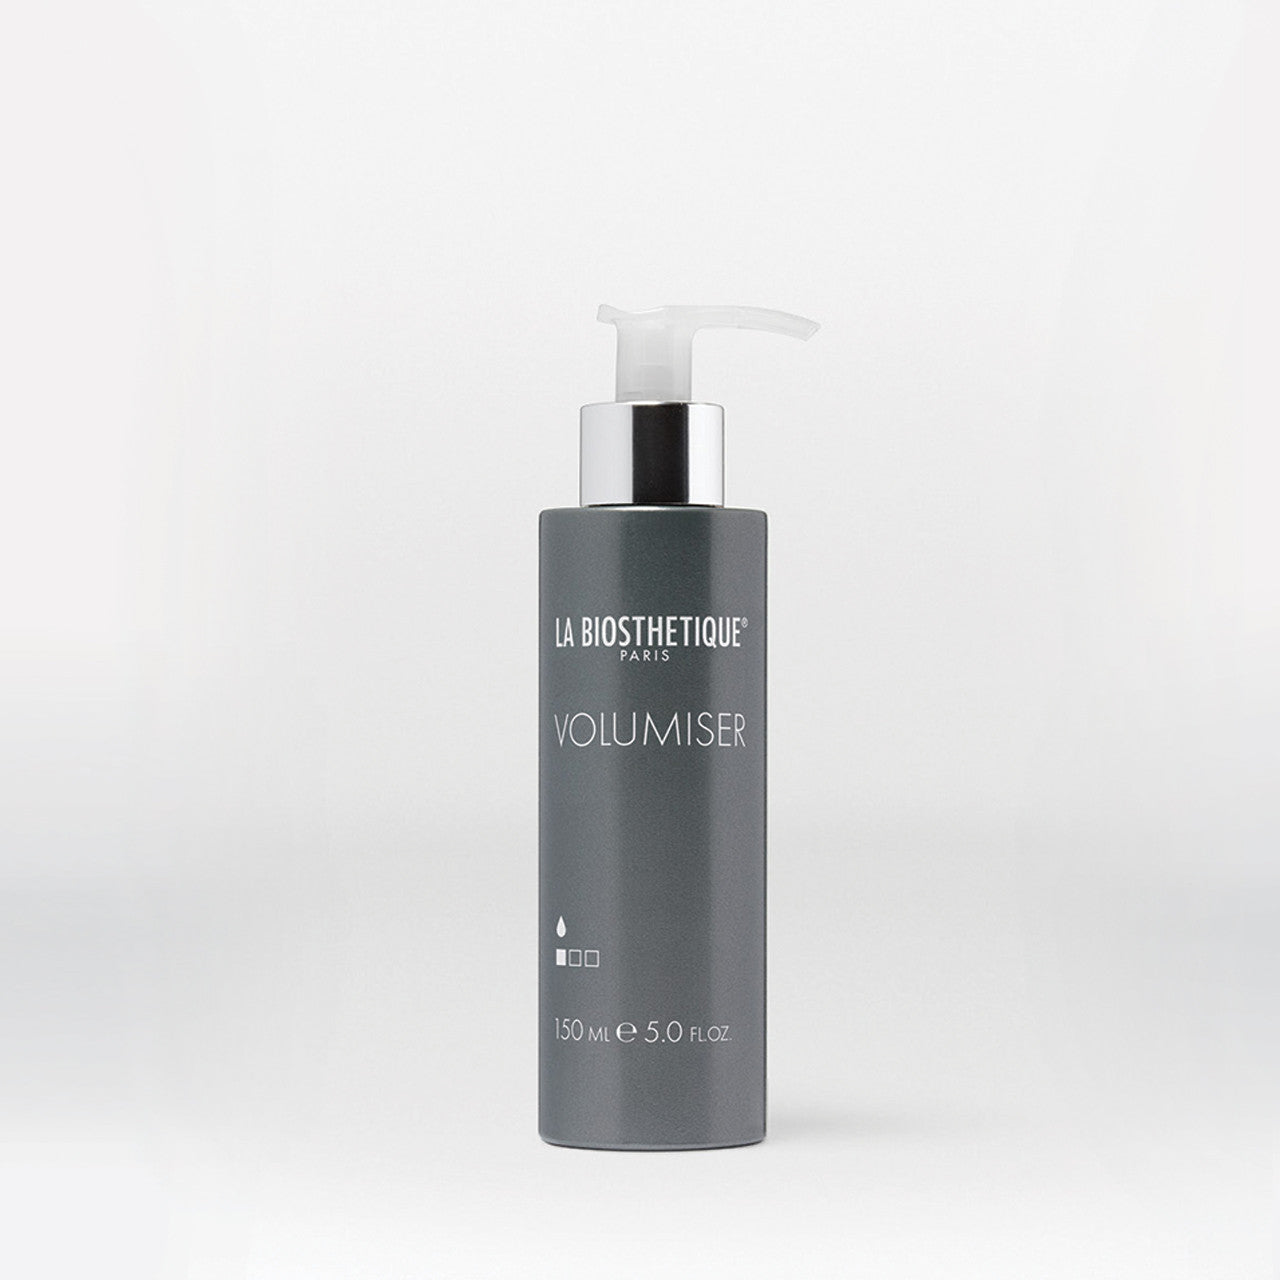 La Biosthetique's Volumiser 150ml - A weightless gel for volume, texture and body.